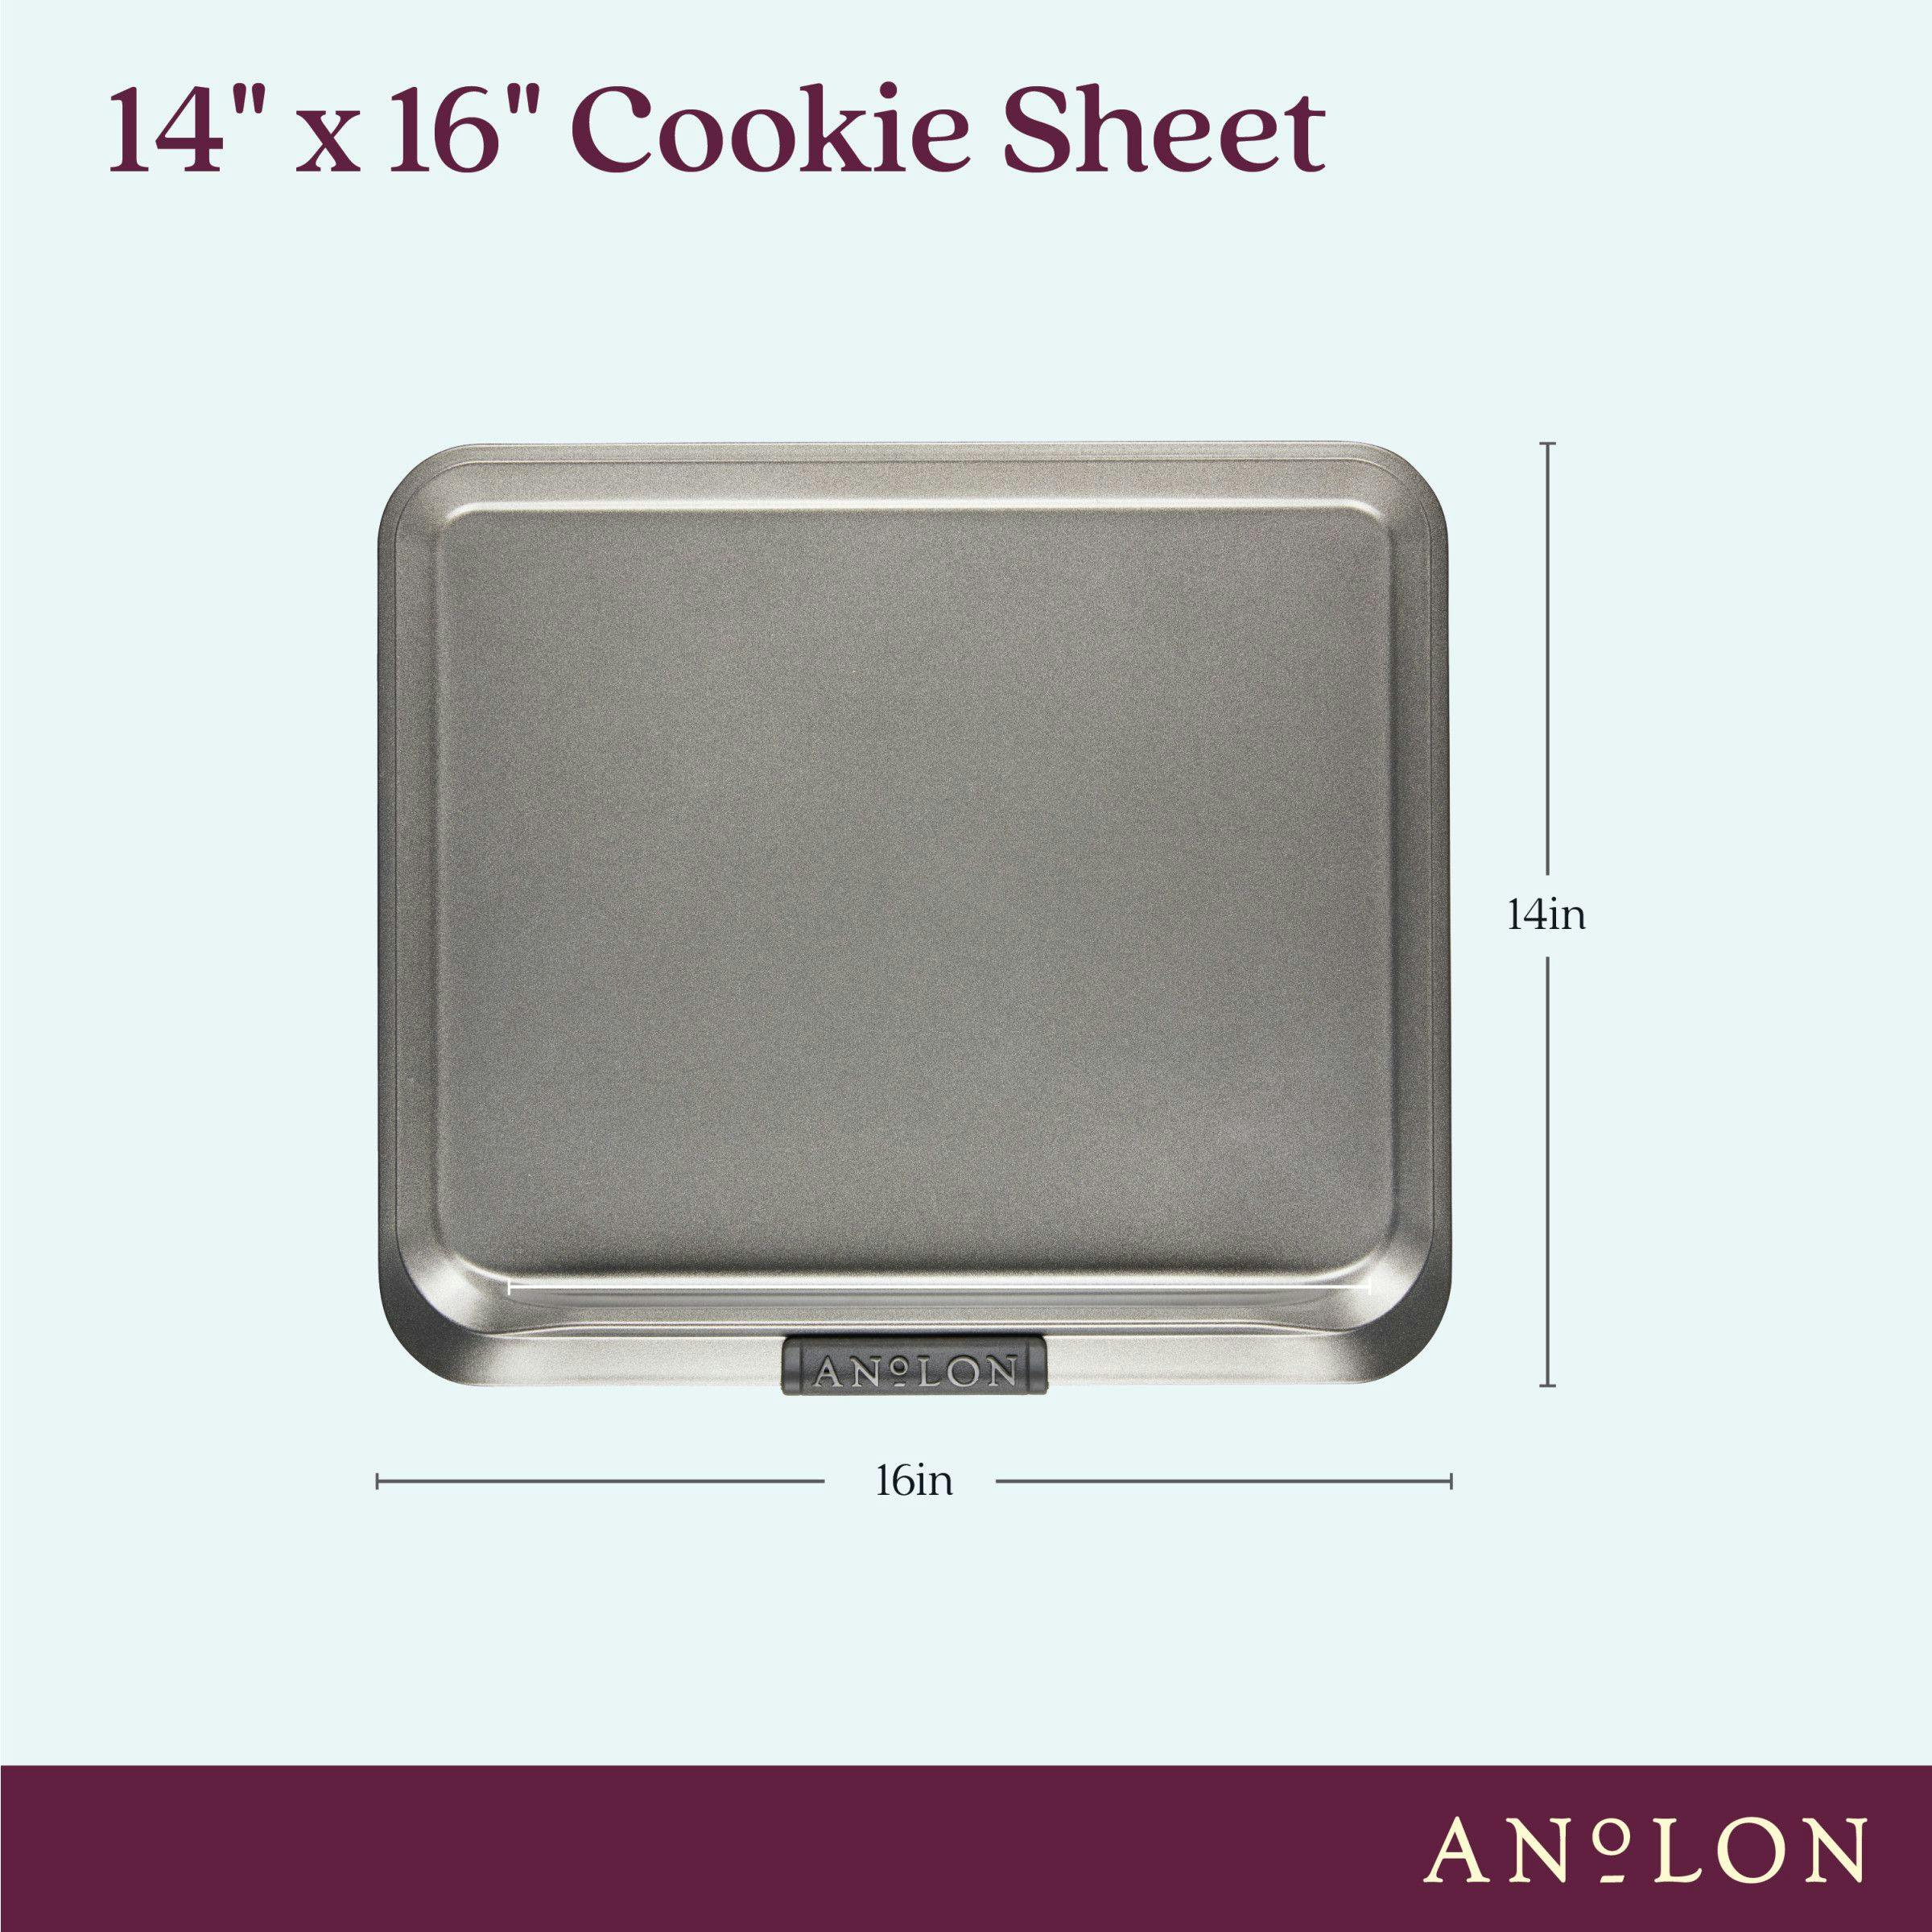 Anolon Advanced Nonstick Bakeware with Grips, Nonstick Cookie Sheet /  Baking Sheet - 11 Inch x 17 Inch, Gray